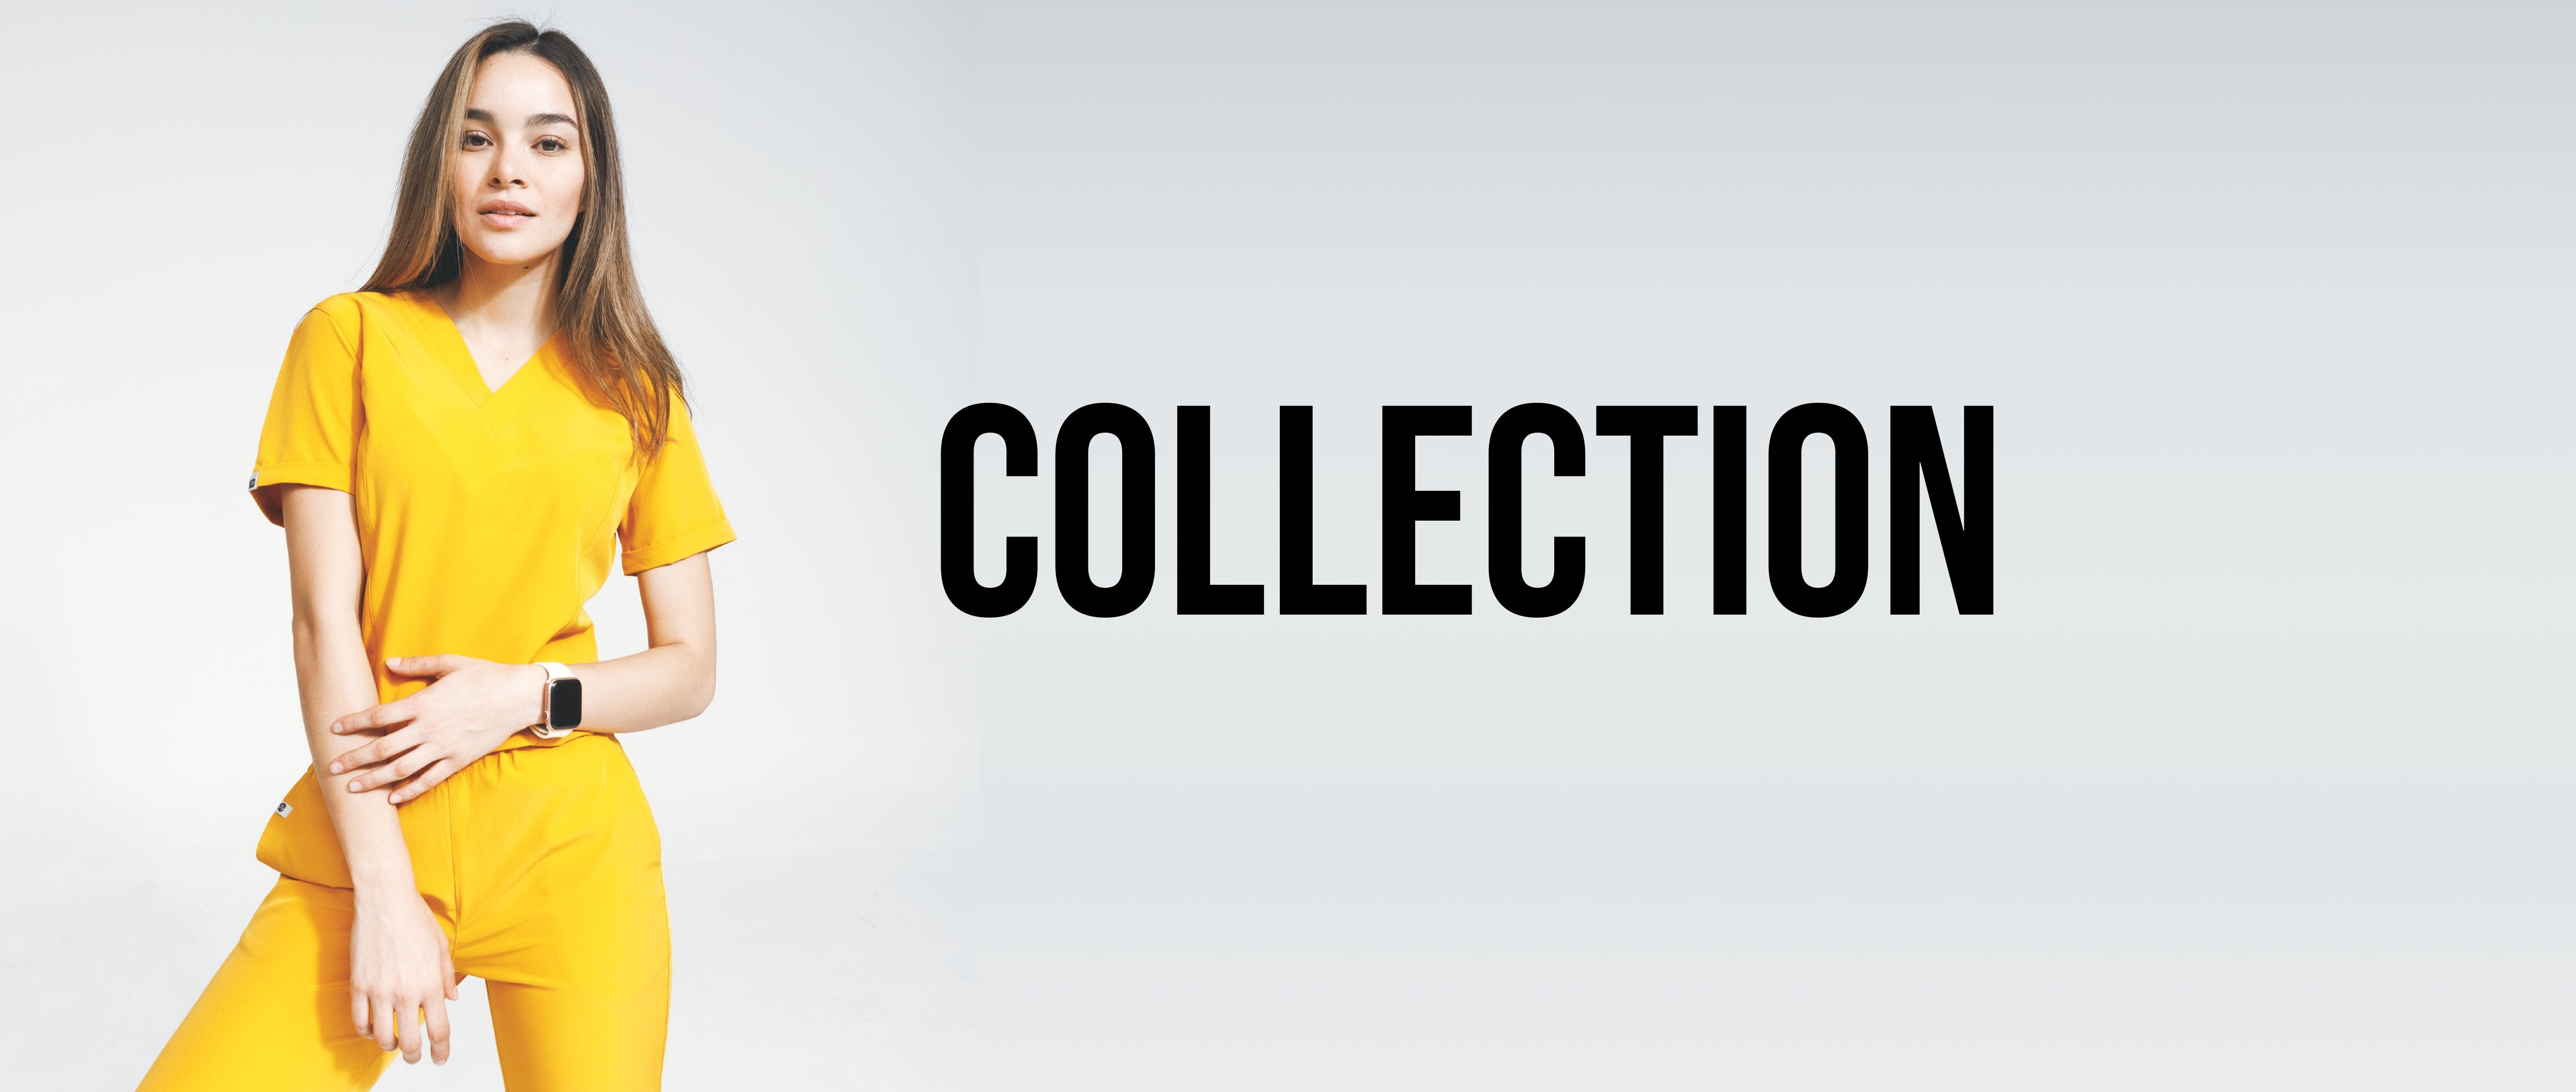 collections-background